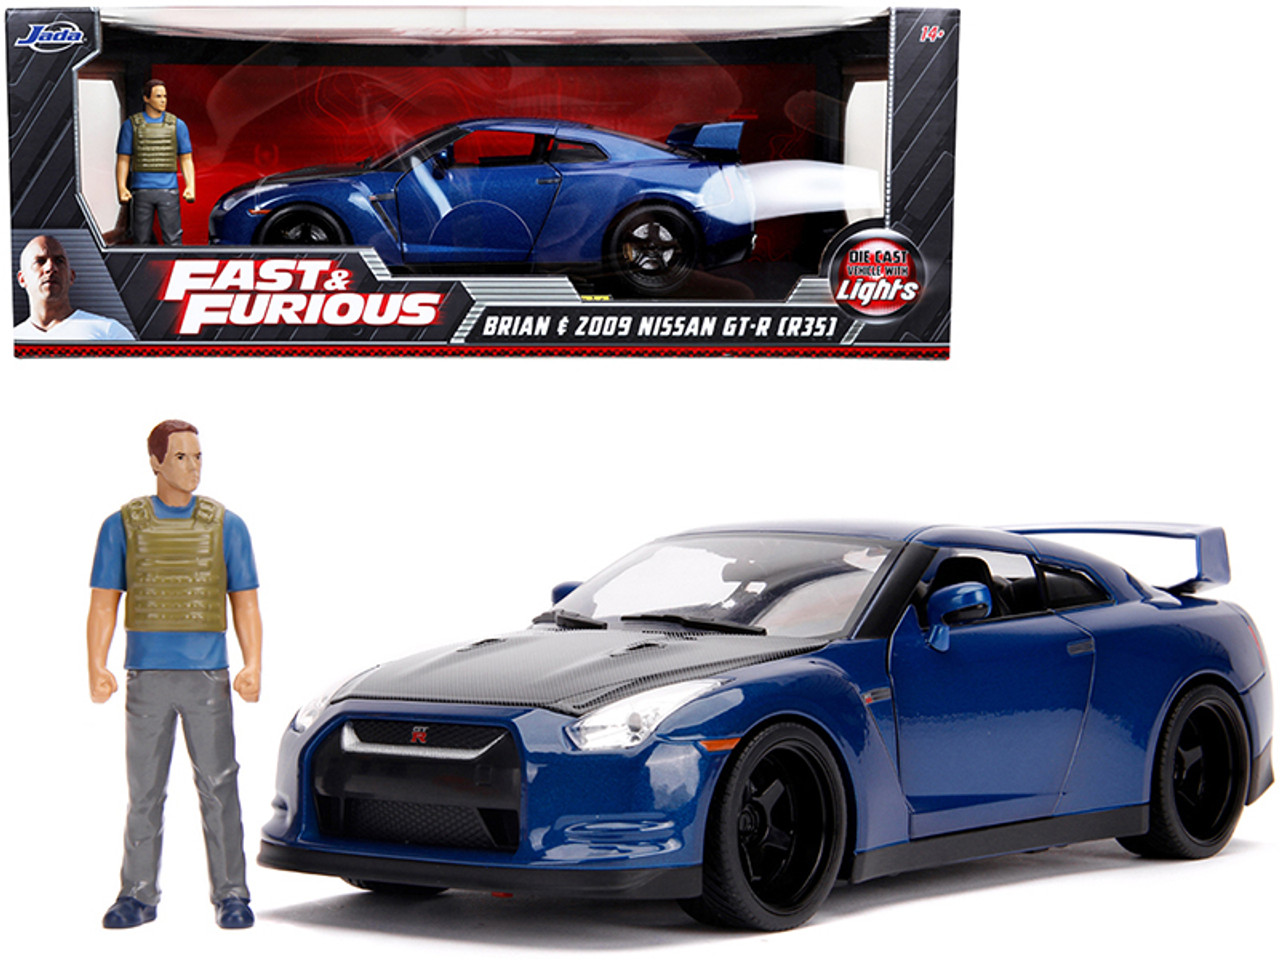 1/18 Jada 2009 Nissan GT-R R35 (Blue Metallic and Carbon) with Lights and  Brian Figurine 